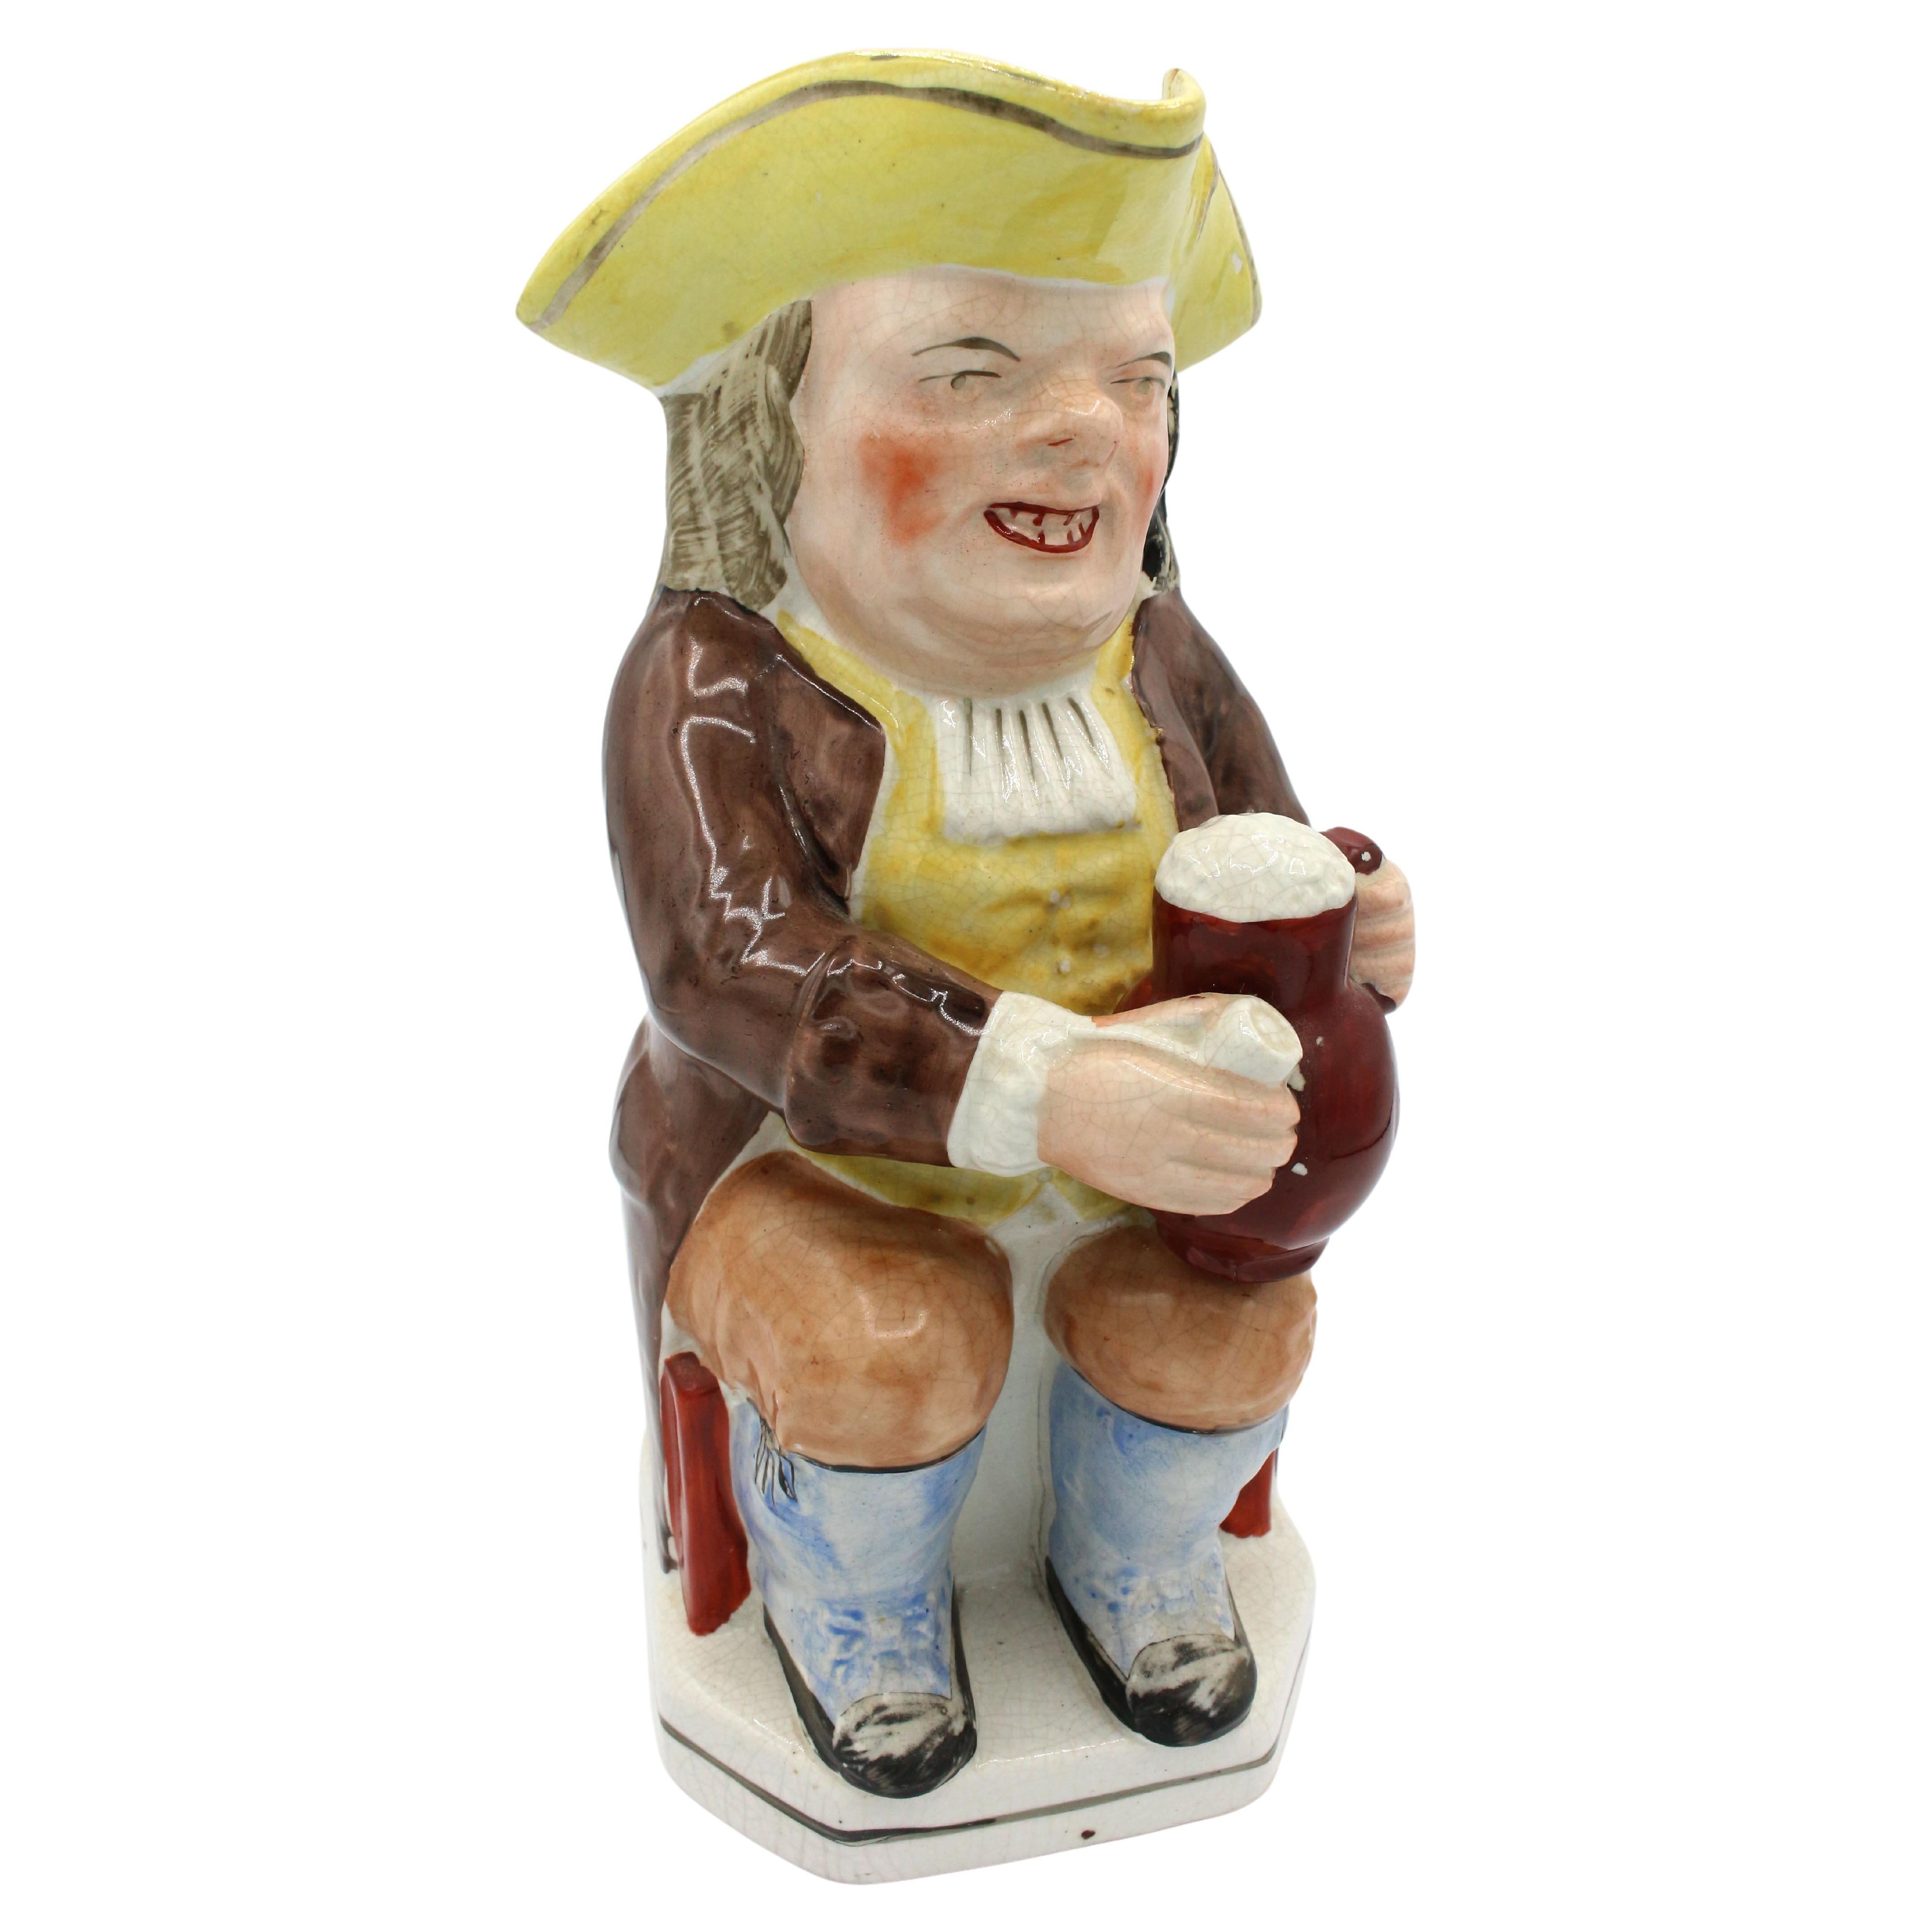 The Drunken Parson with White Clerical Collar Toby Jug, England, circa 1880s